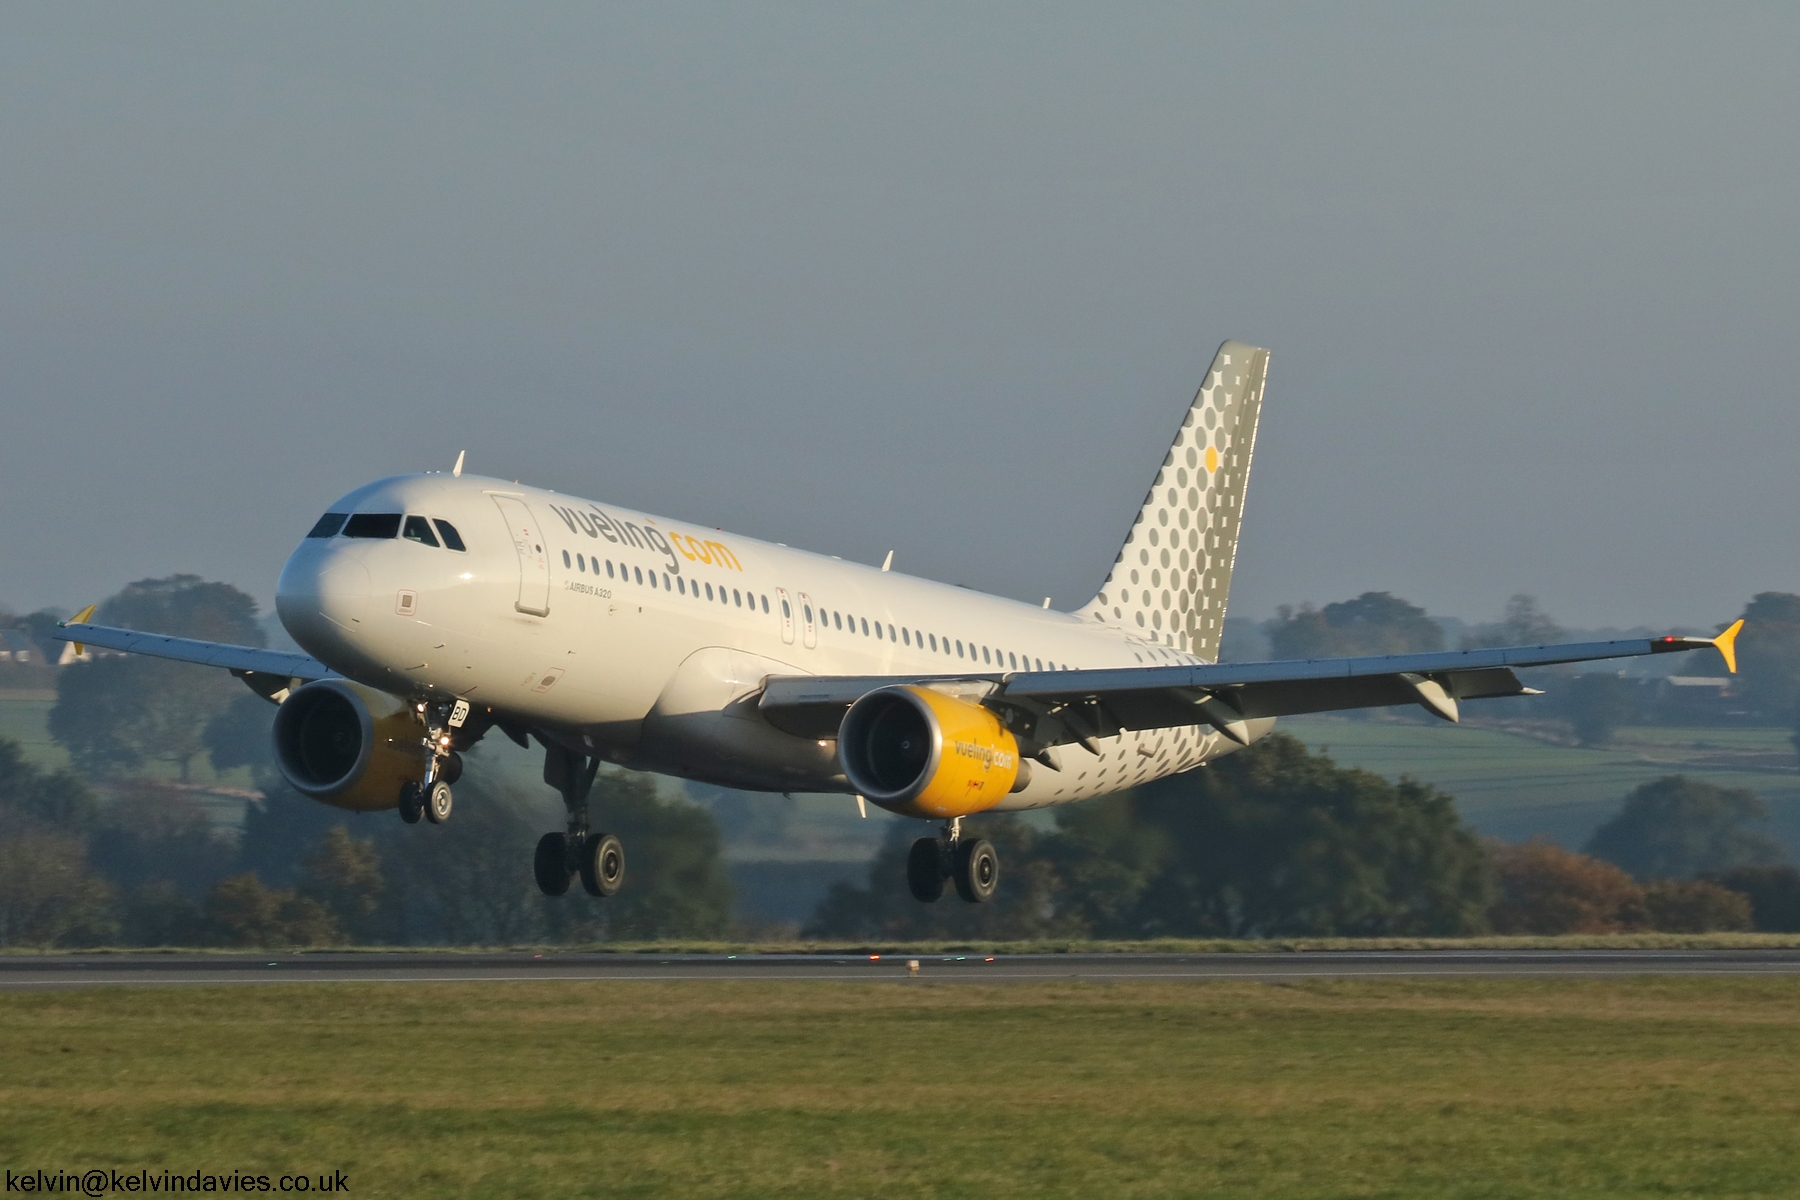 Vueling Airlines A320 EC-MBD